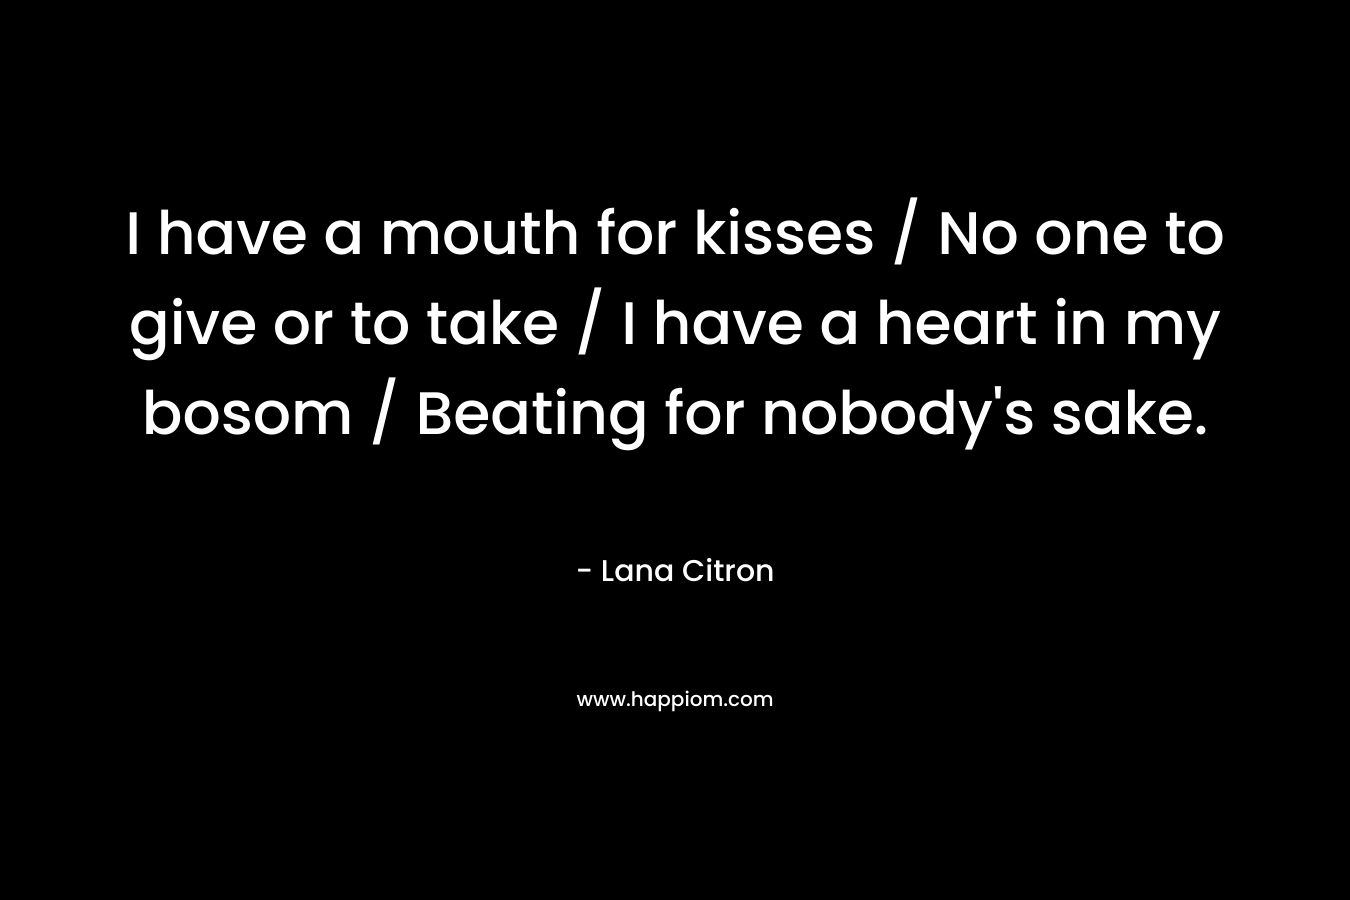 I have a mouth for kisses / No one to give or to take / I have a heart in my bosom / Beating for nobody's sake.